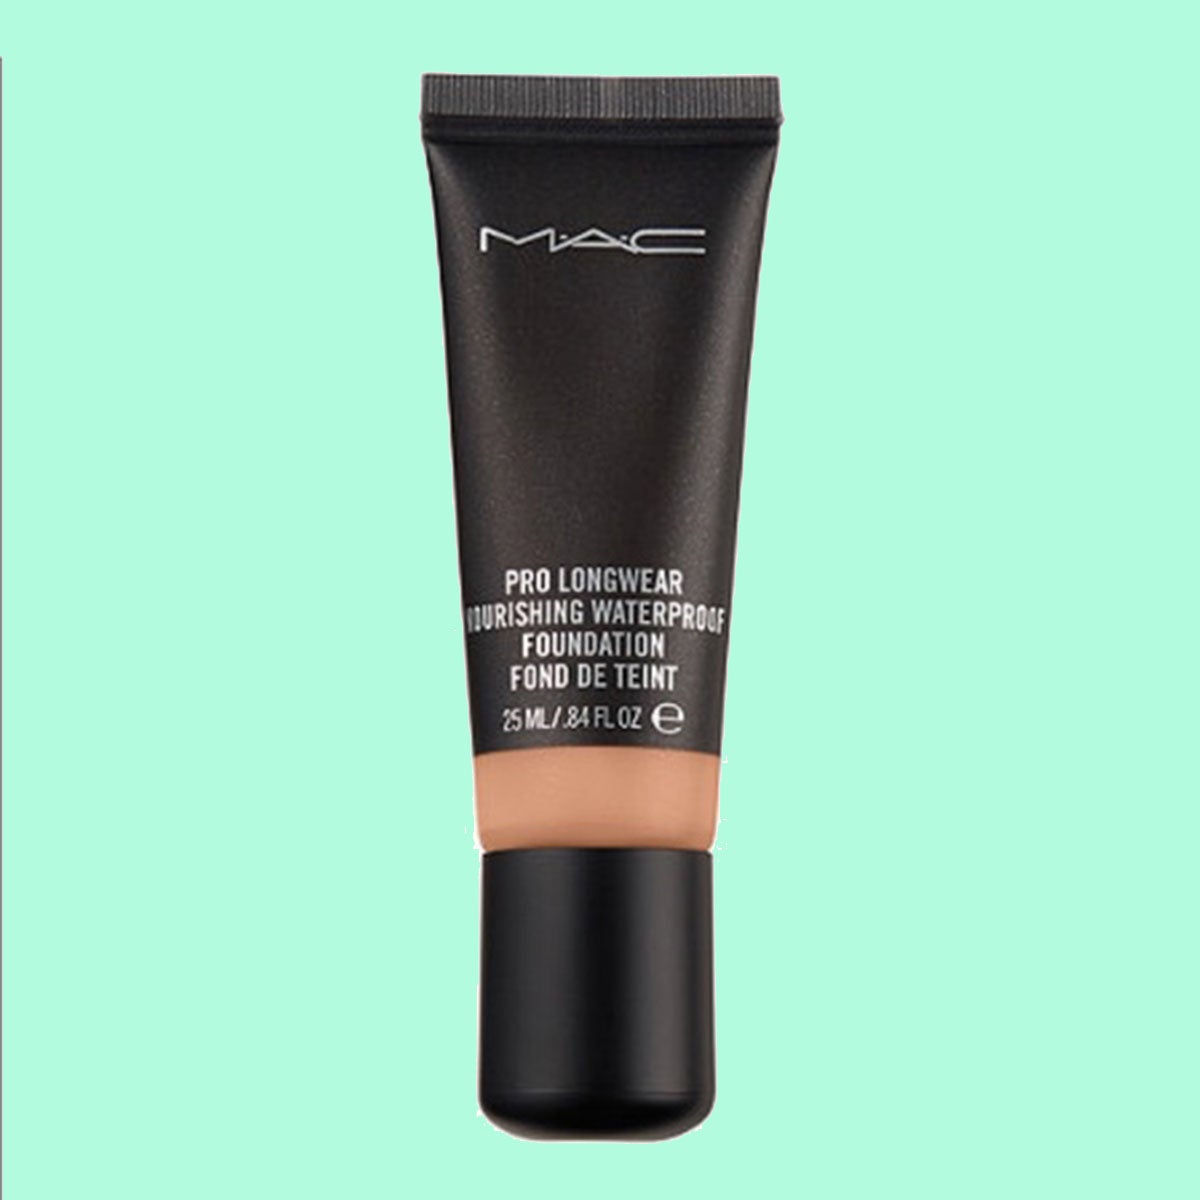 Skeptical About "Longwear" Makeup? Here Are 7 Products That Actually Last All Day